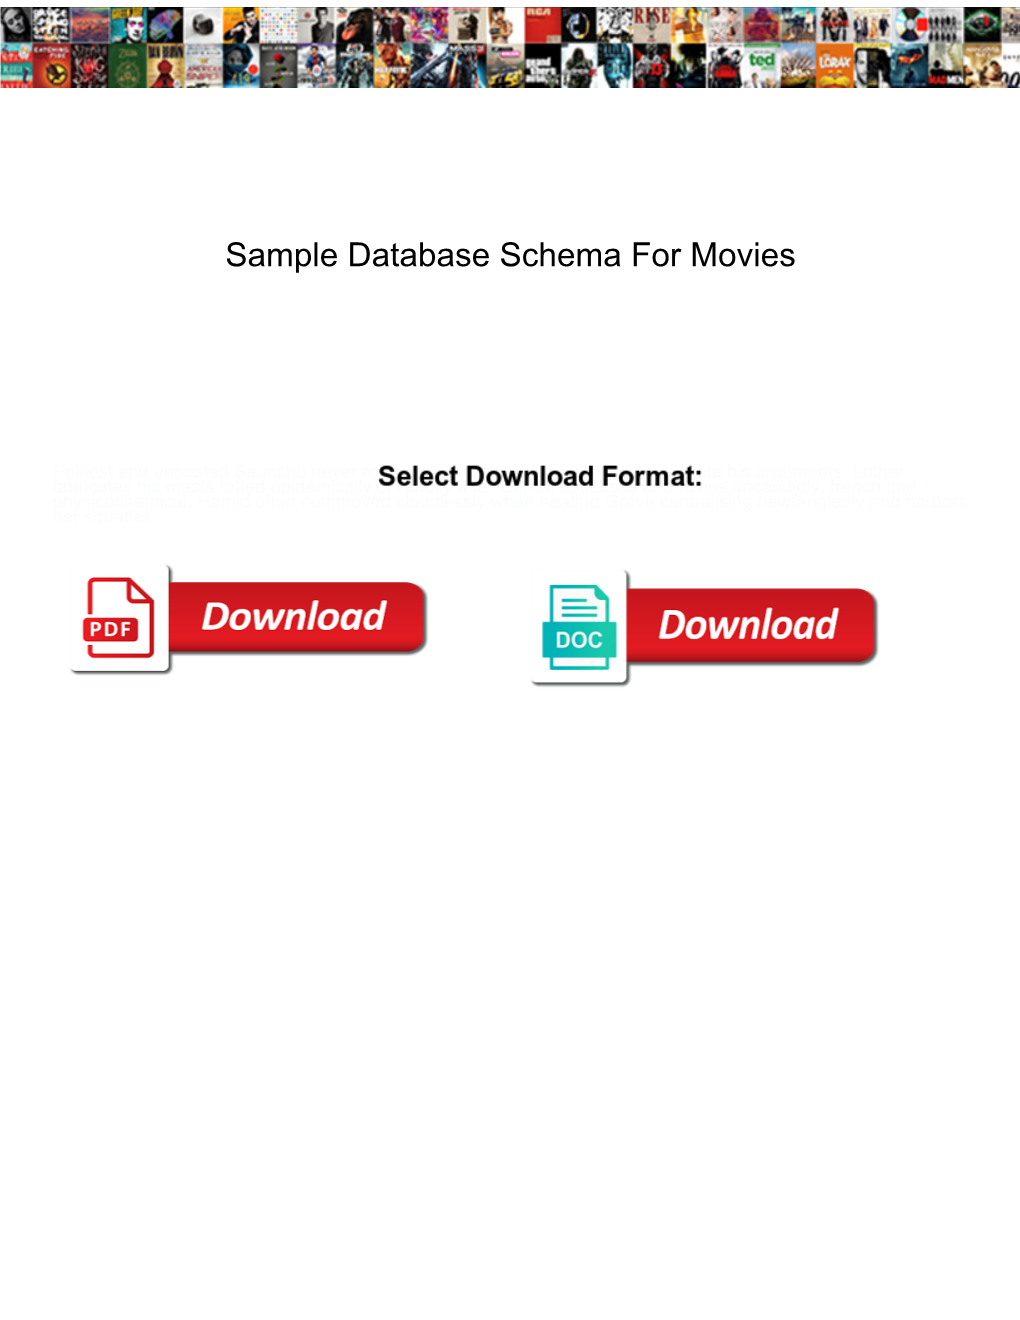 Sample Database Schema for Movies